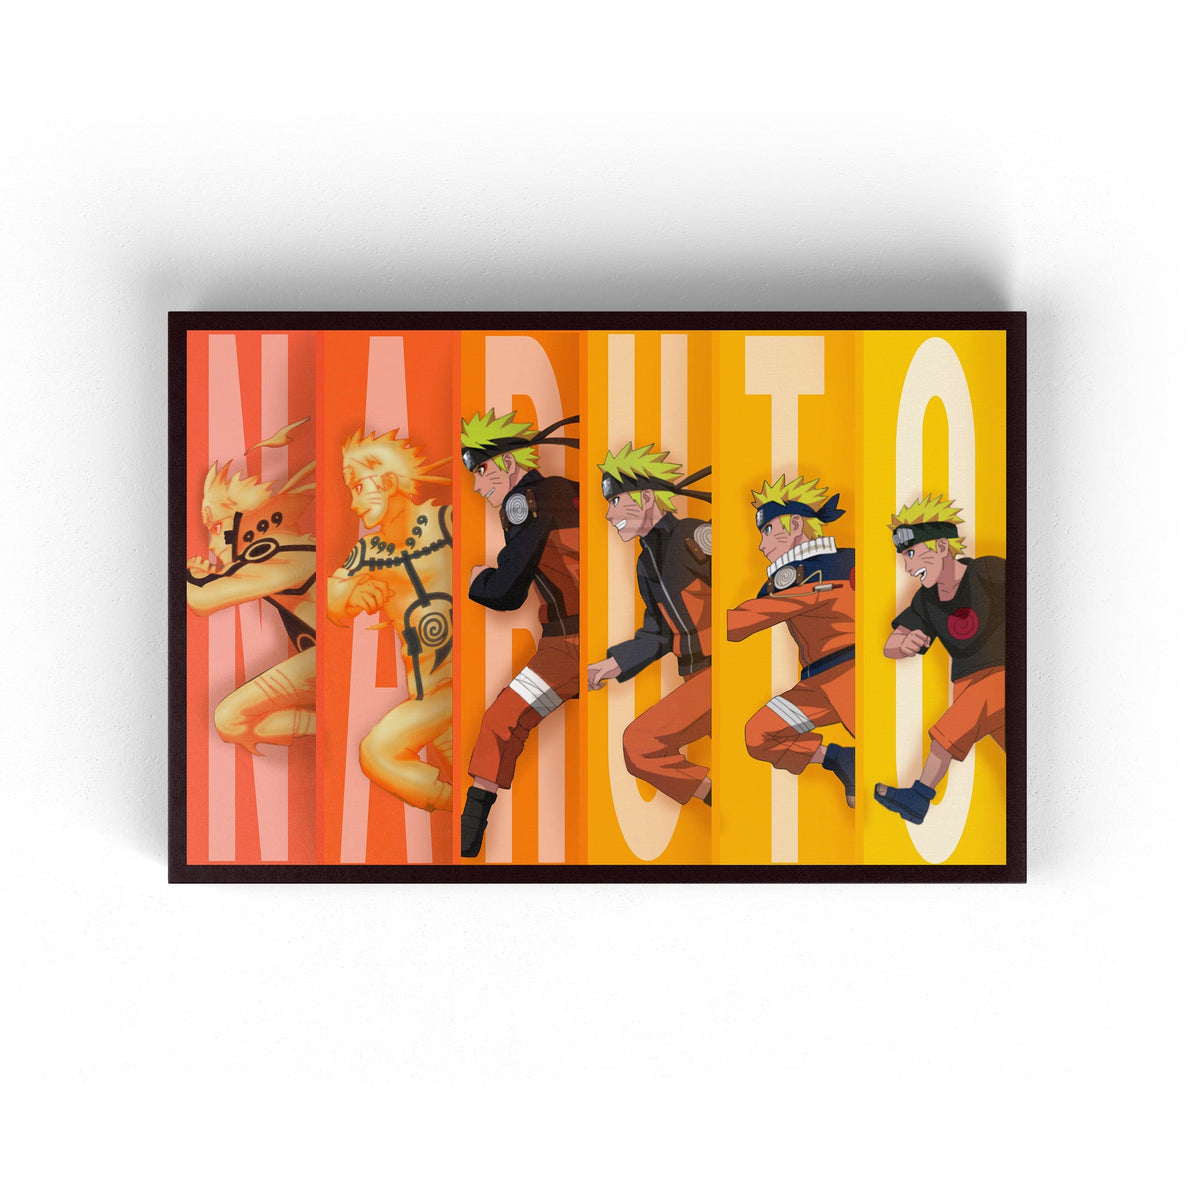 NARUTO Black Framed Poster (8x12 Inches) For Anime Naruto Fans